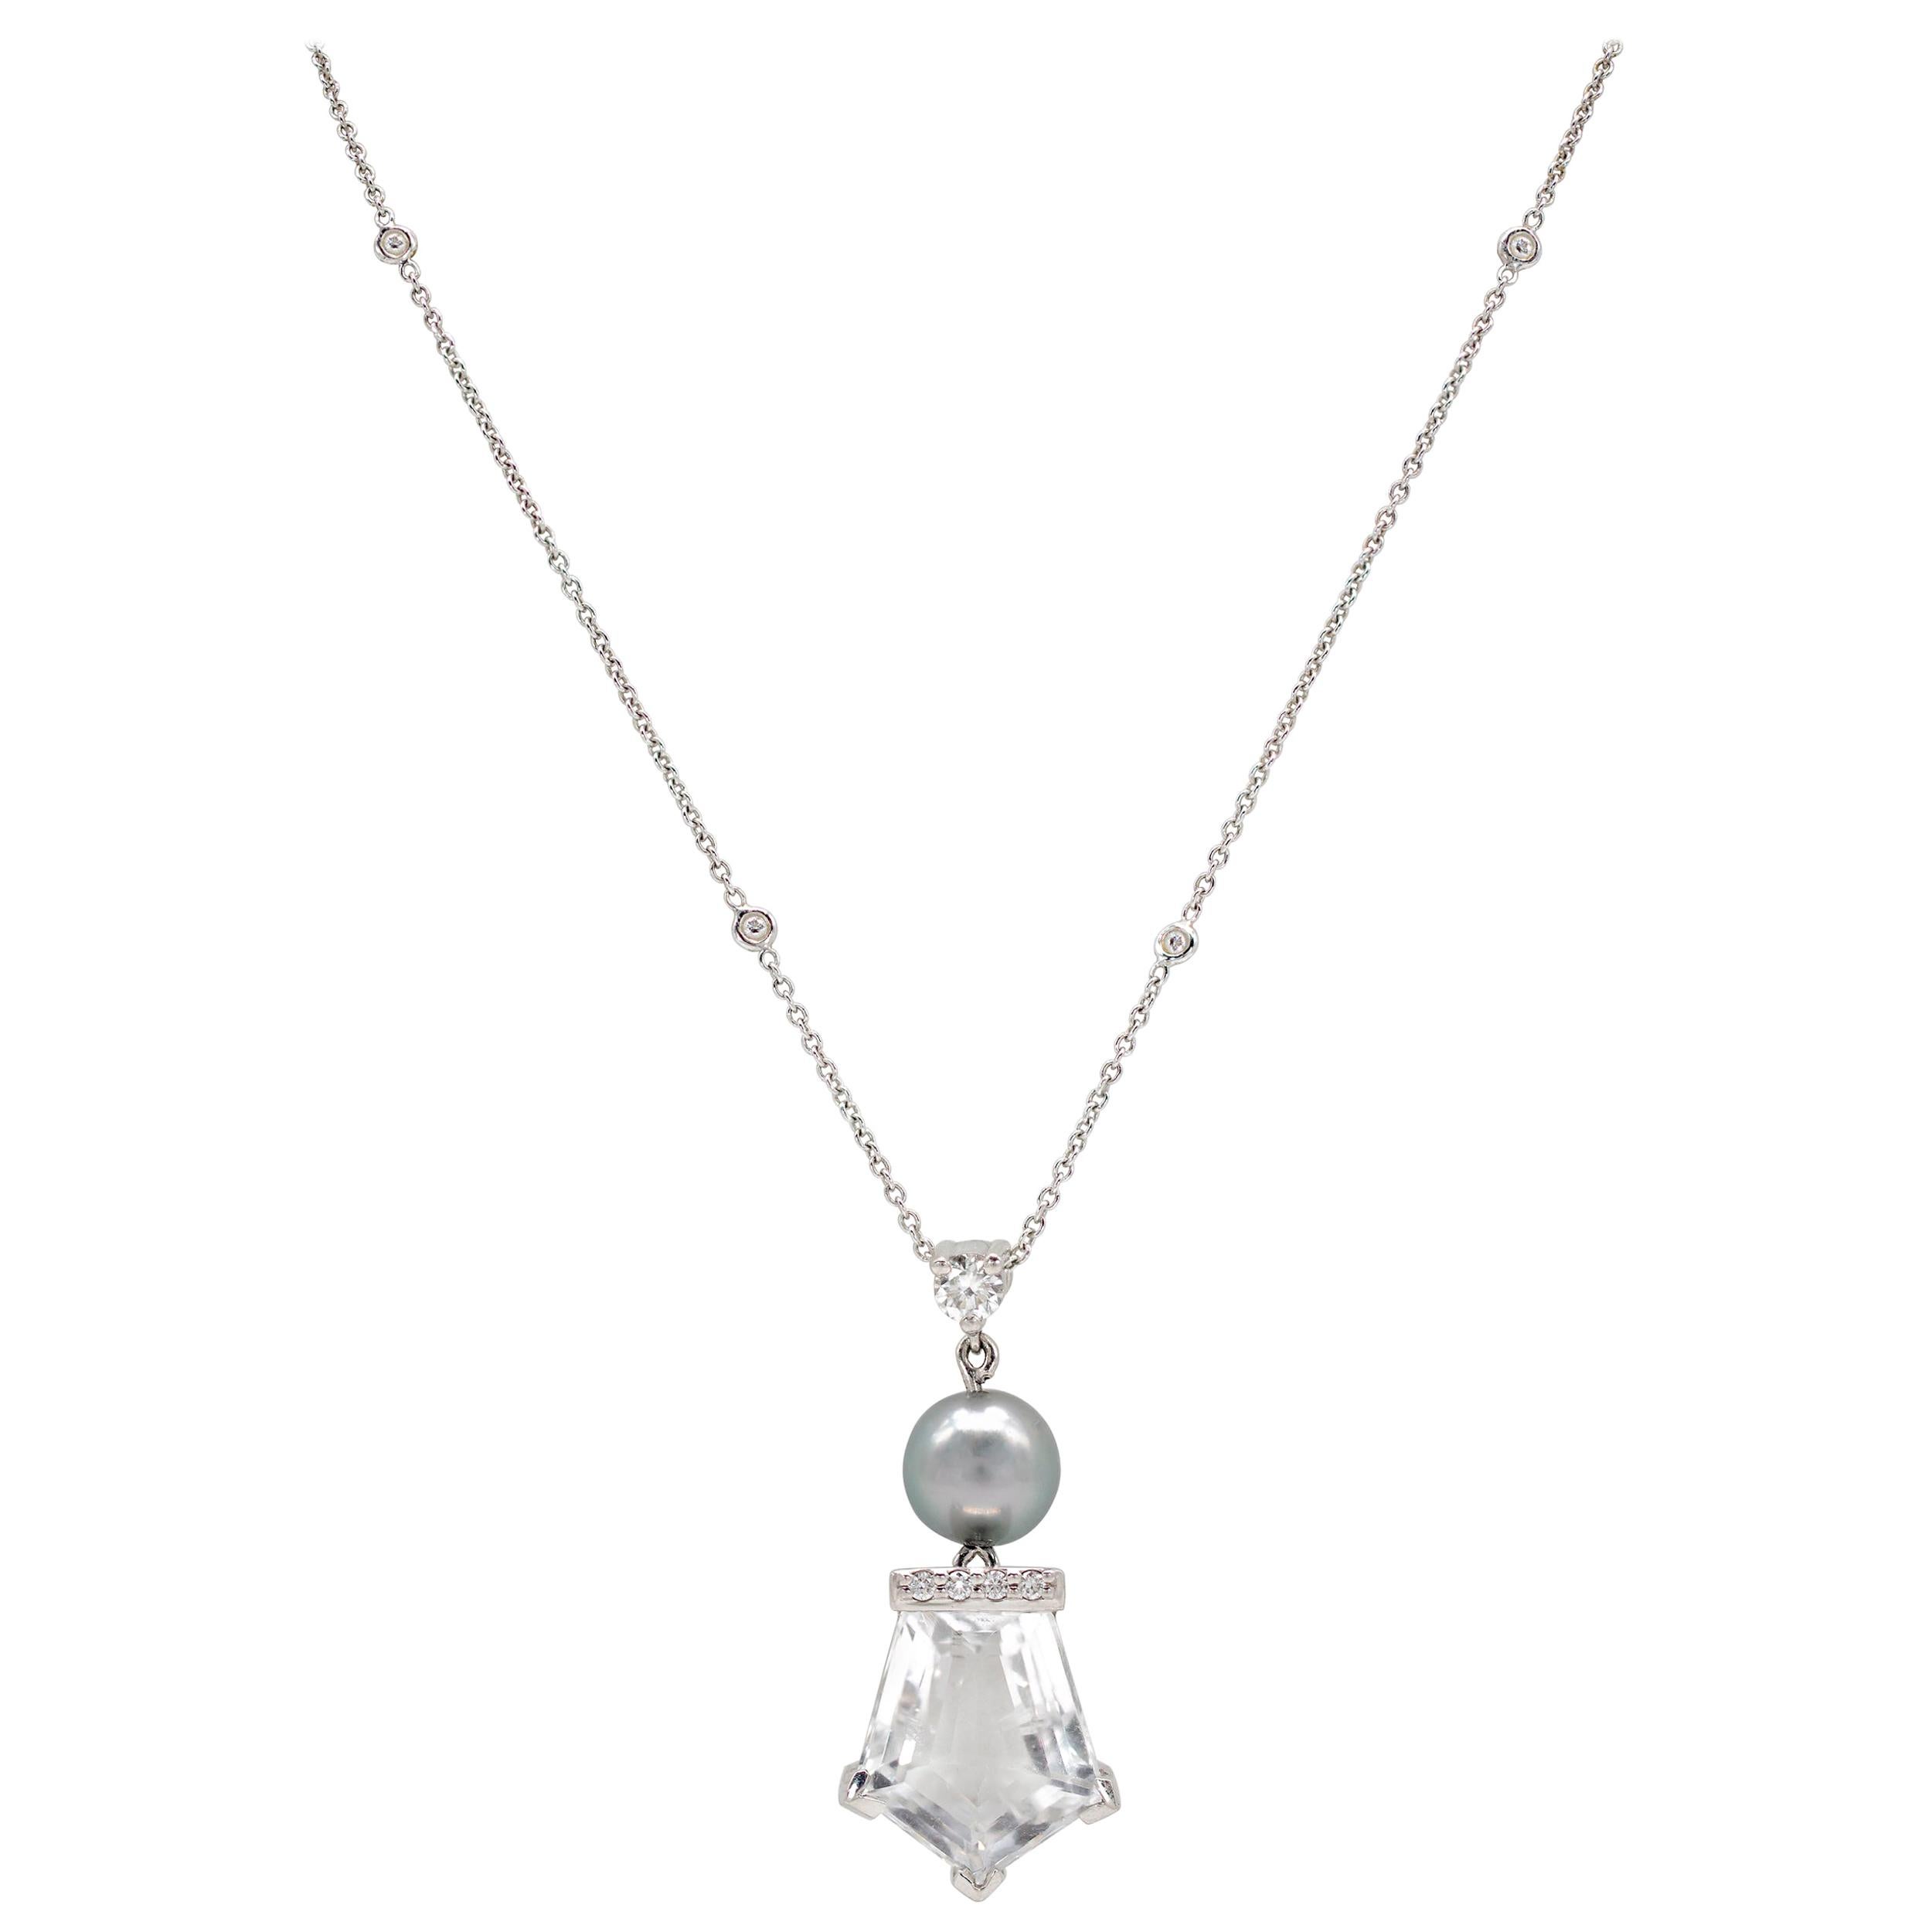 10.83 Carat Total Tahitian Pearl Rock Crystal Diamond Necklace For Sale